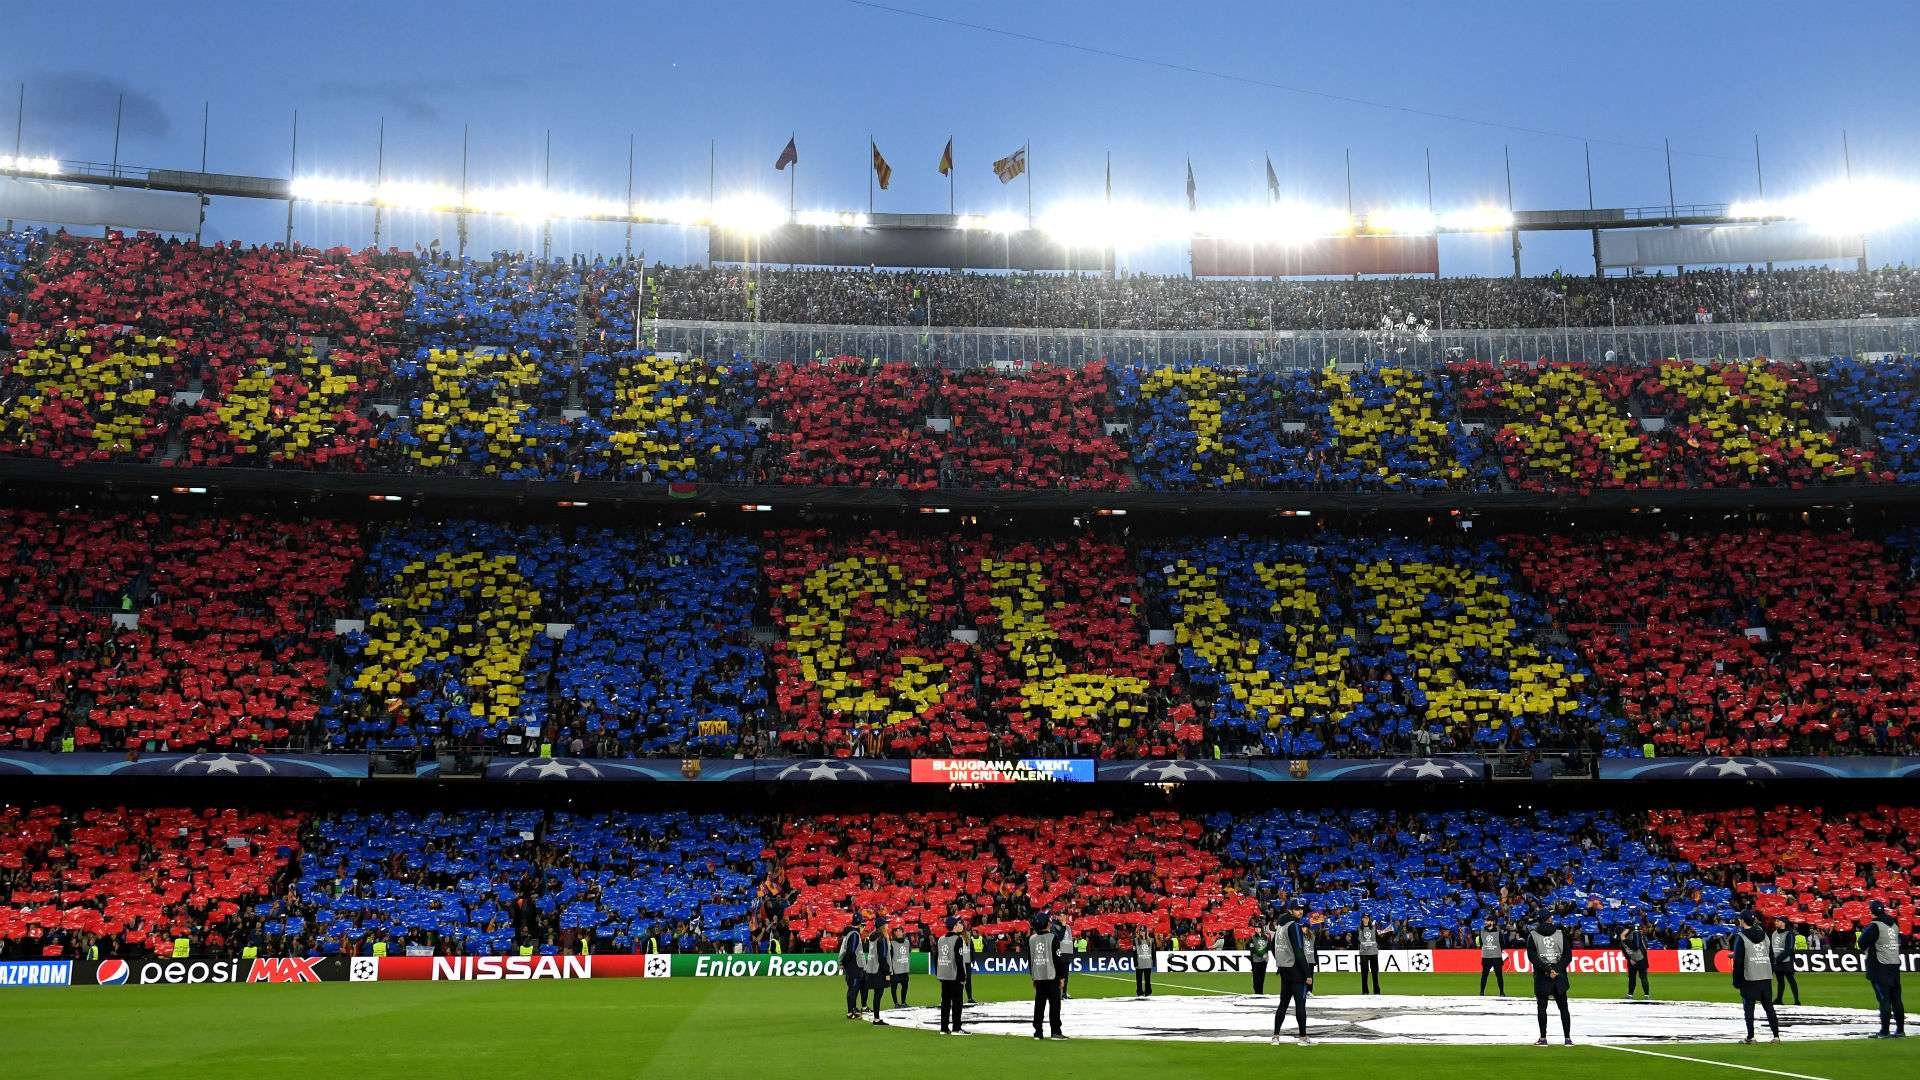 Mes que un club: Barcelona club motto meaning & history in Catalan independence